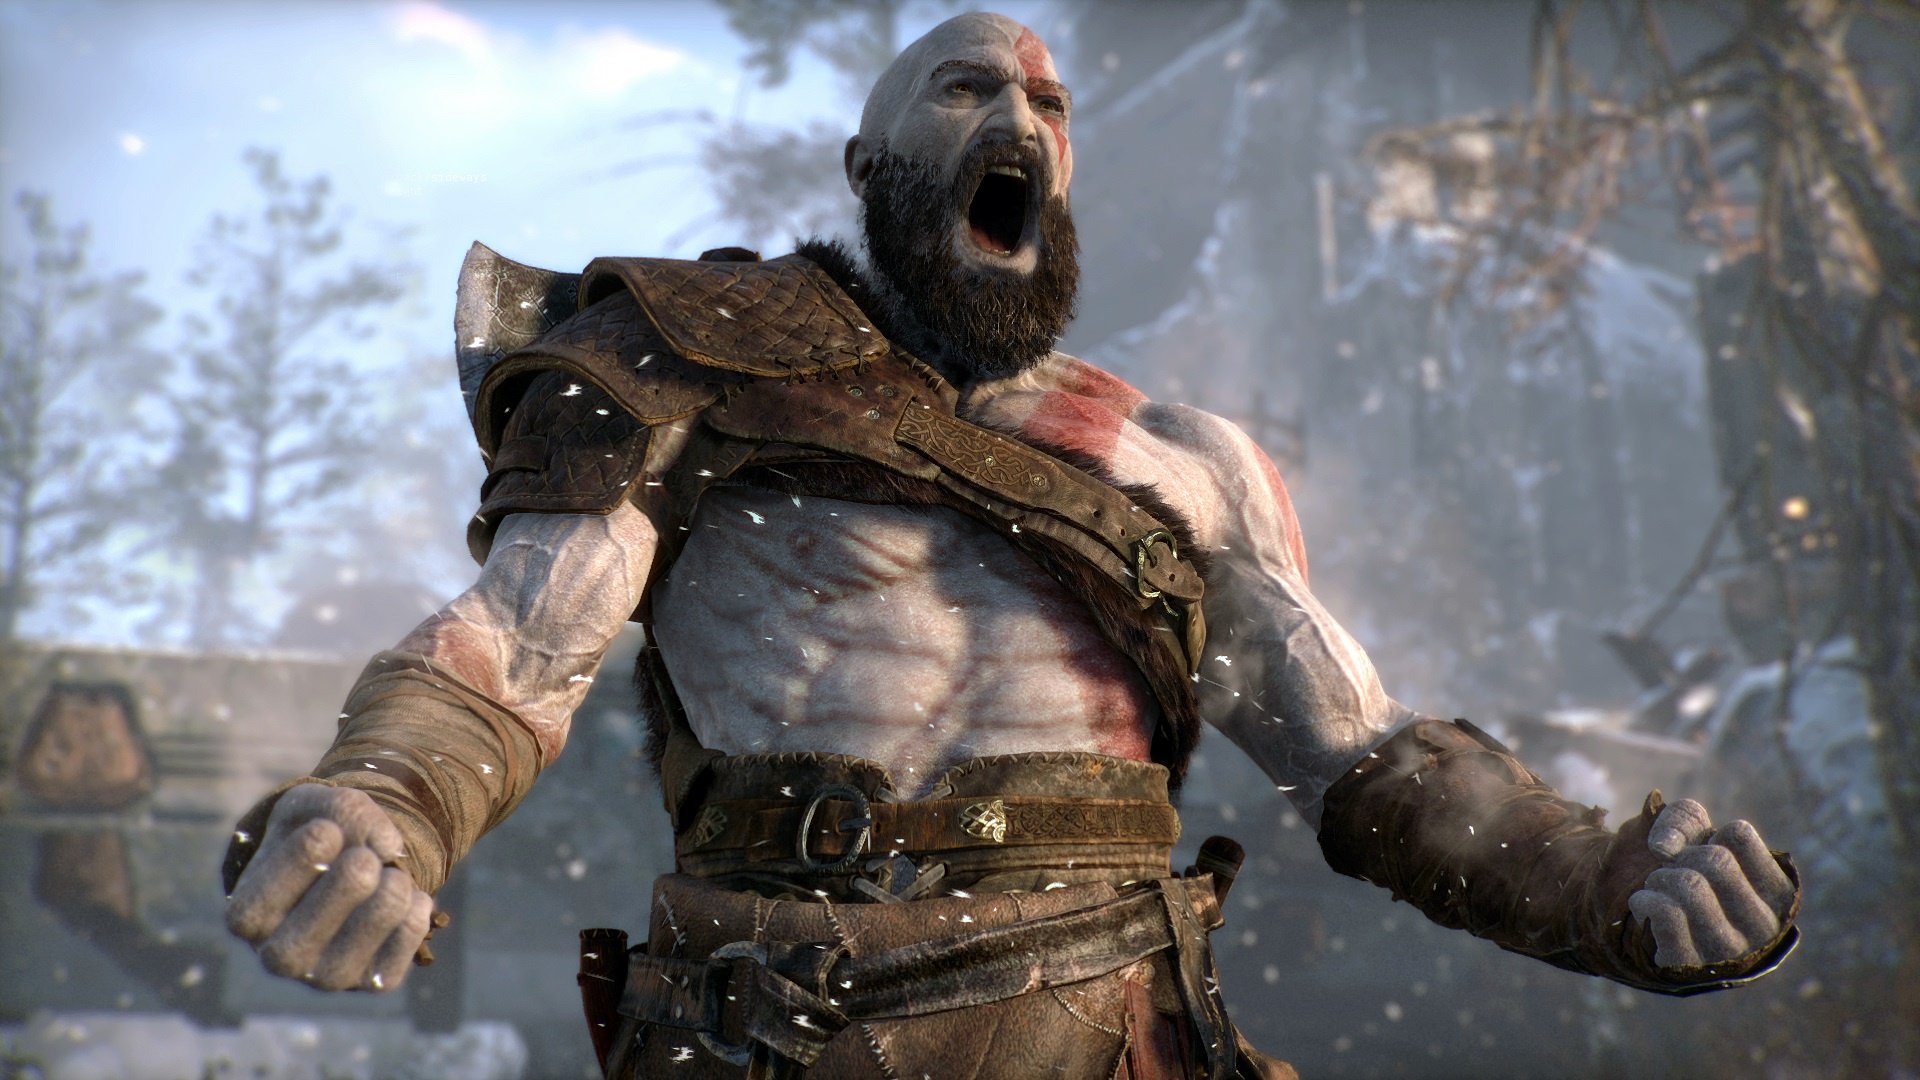 Flashy new God of War trailer announces an April 20 release date on PS4